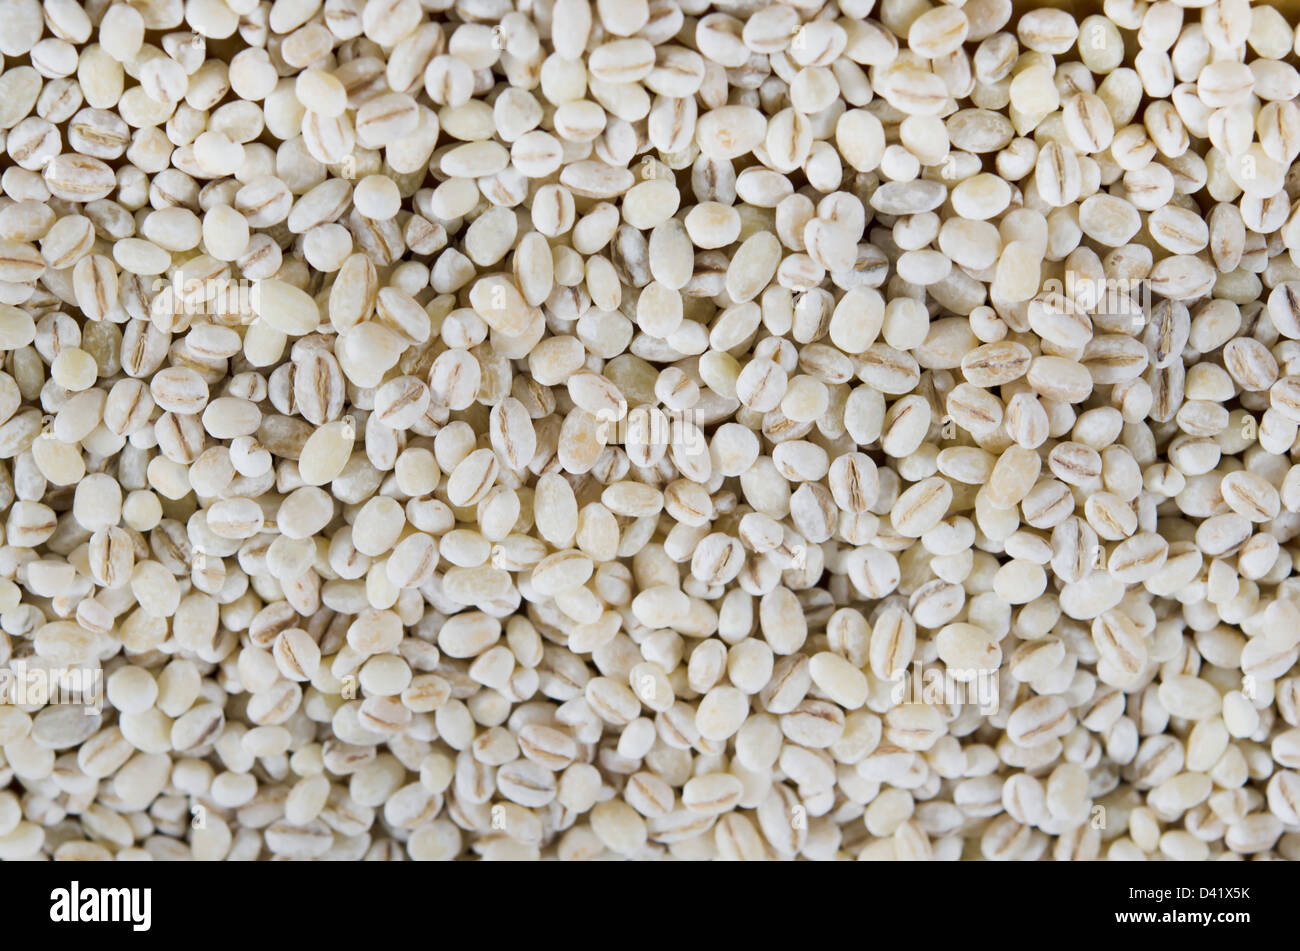 Pearl barley texture background full frame Stock Photo - Alamy